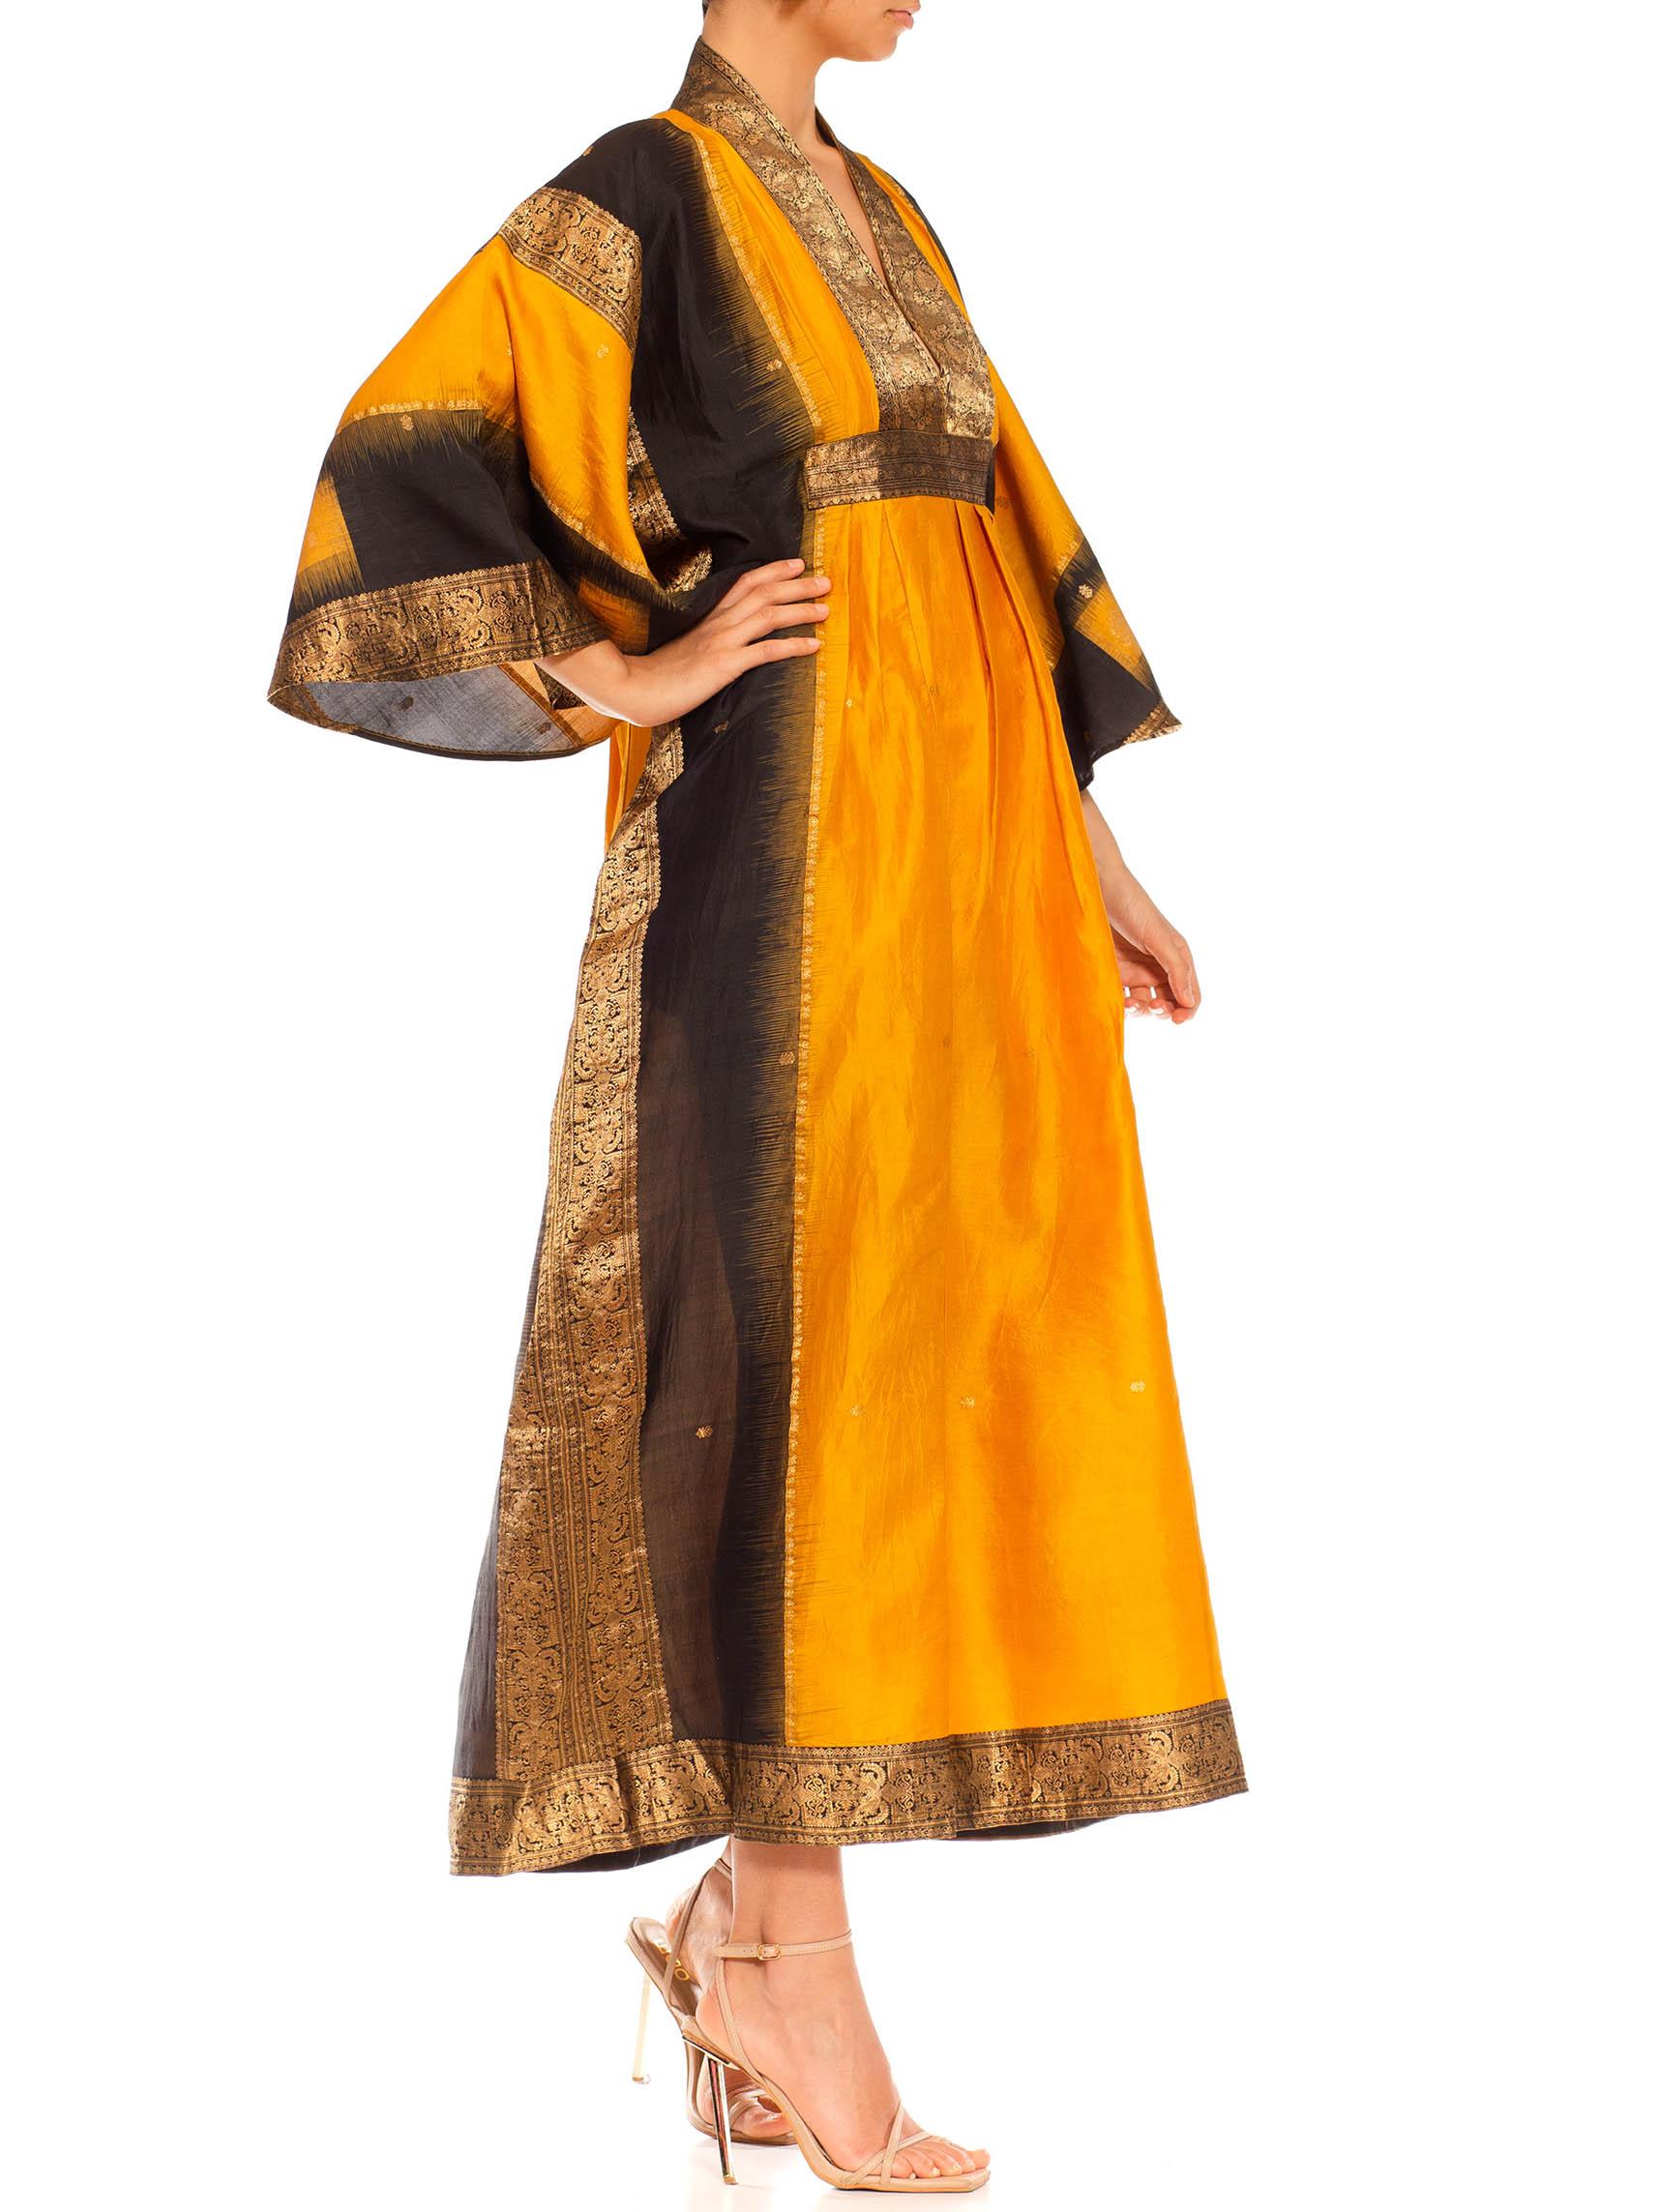 Morphew Collection Saffron, Black & Gold Silk Kaftan Made From Vintage Saris In Excellent Condition For Sale In New York, NY